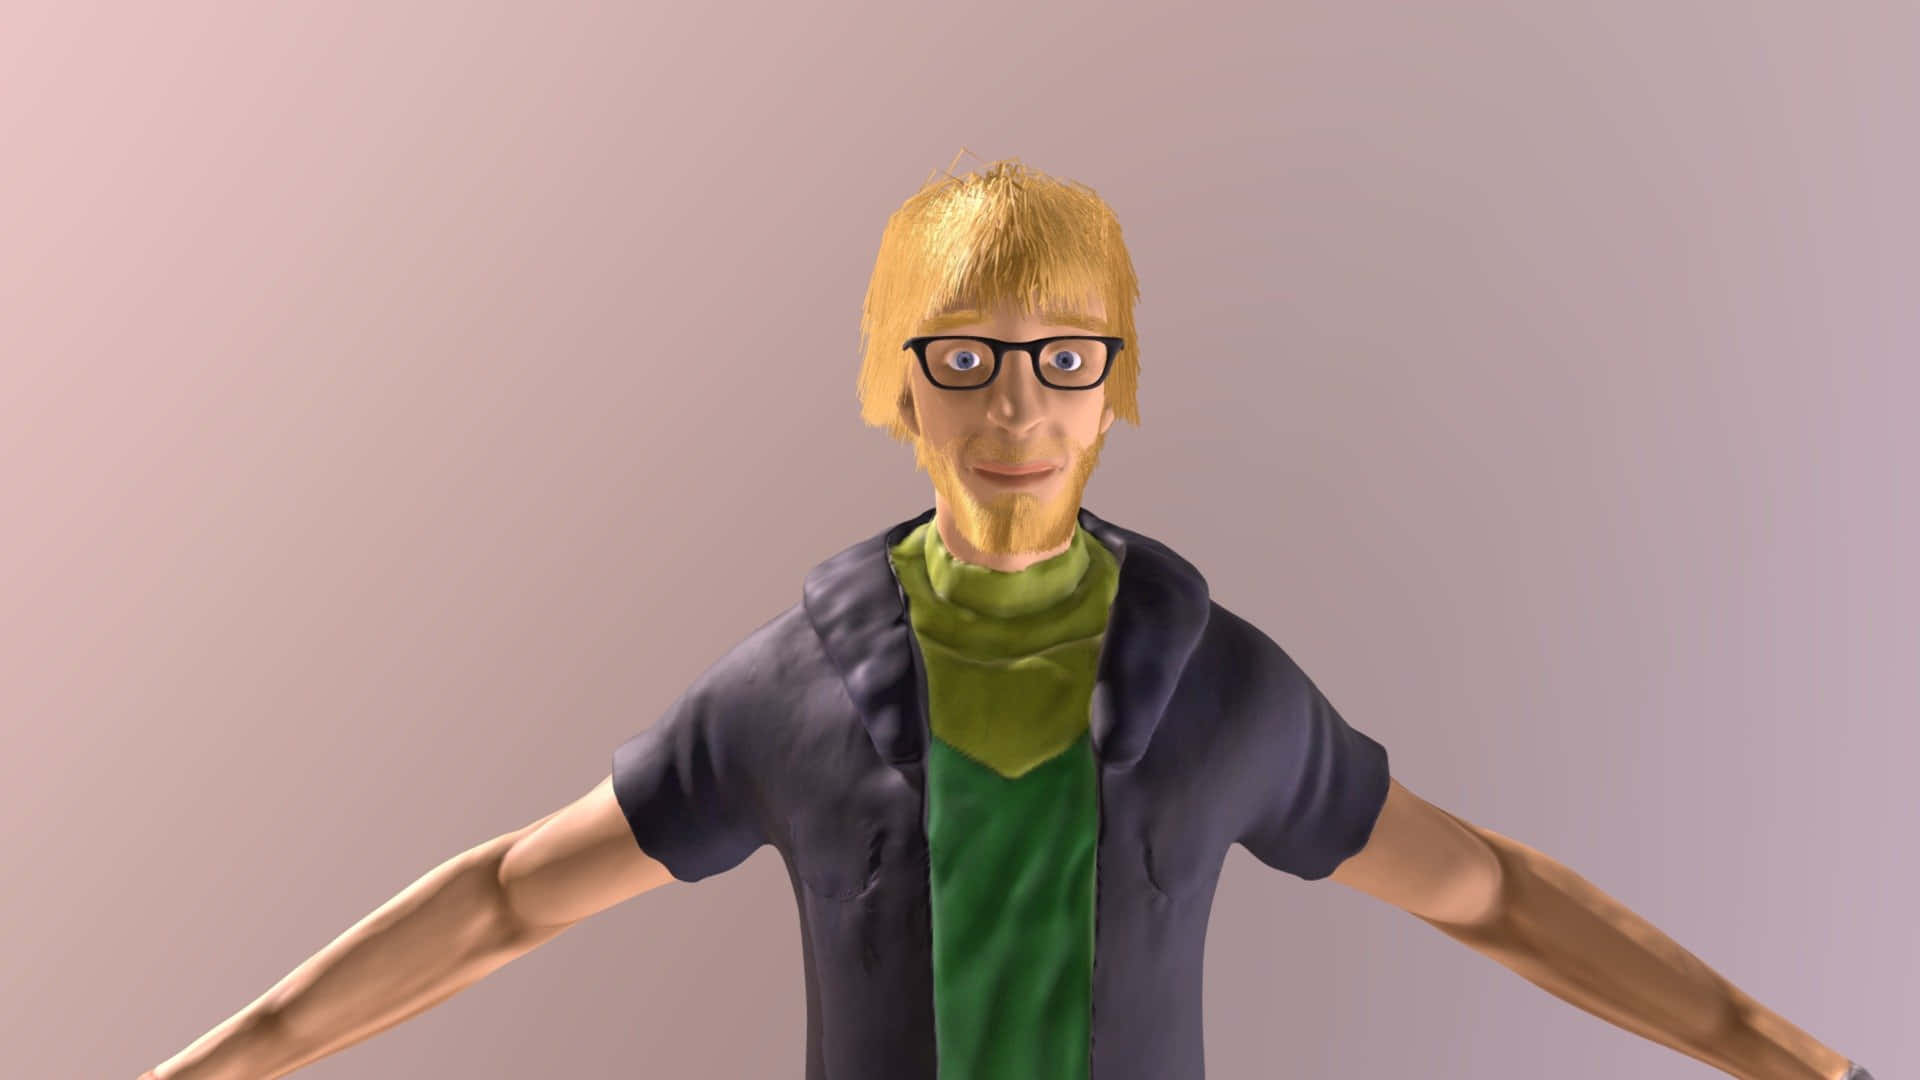 A 3d Model Of A Man With Glasses And Arms Outstretched Wallpaper